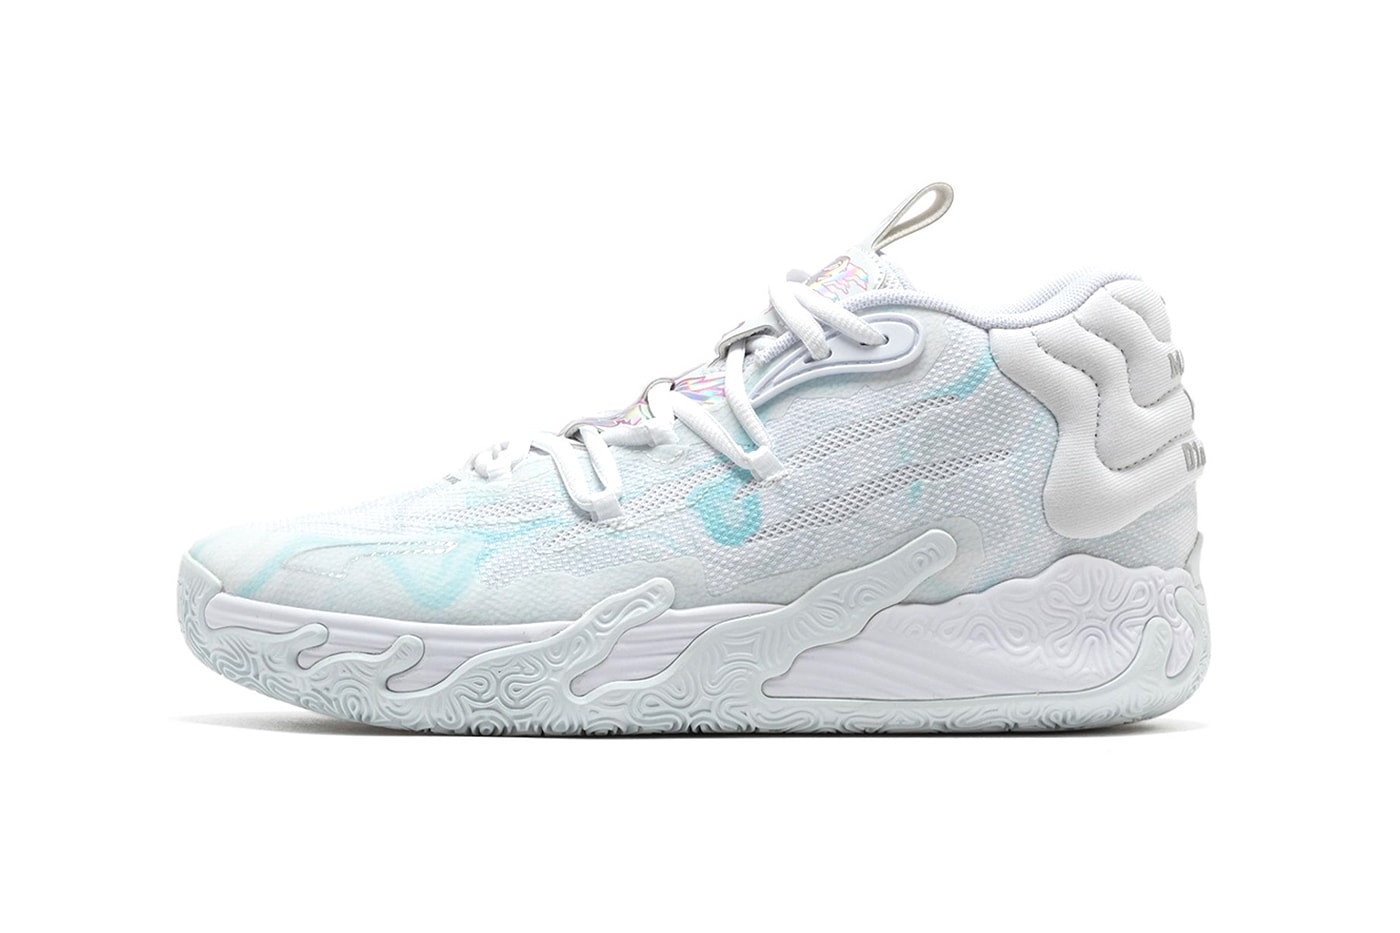 LaMelo Ball's PUMA MB.03 "Iridescent" Has an Official Release Date 379904-01 nba charlotte hornets basketball player spring release all white light blue 